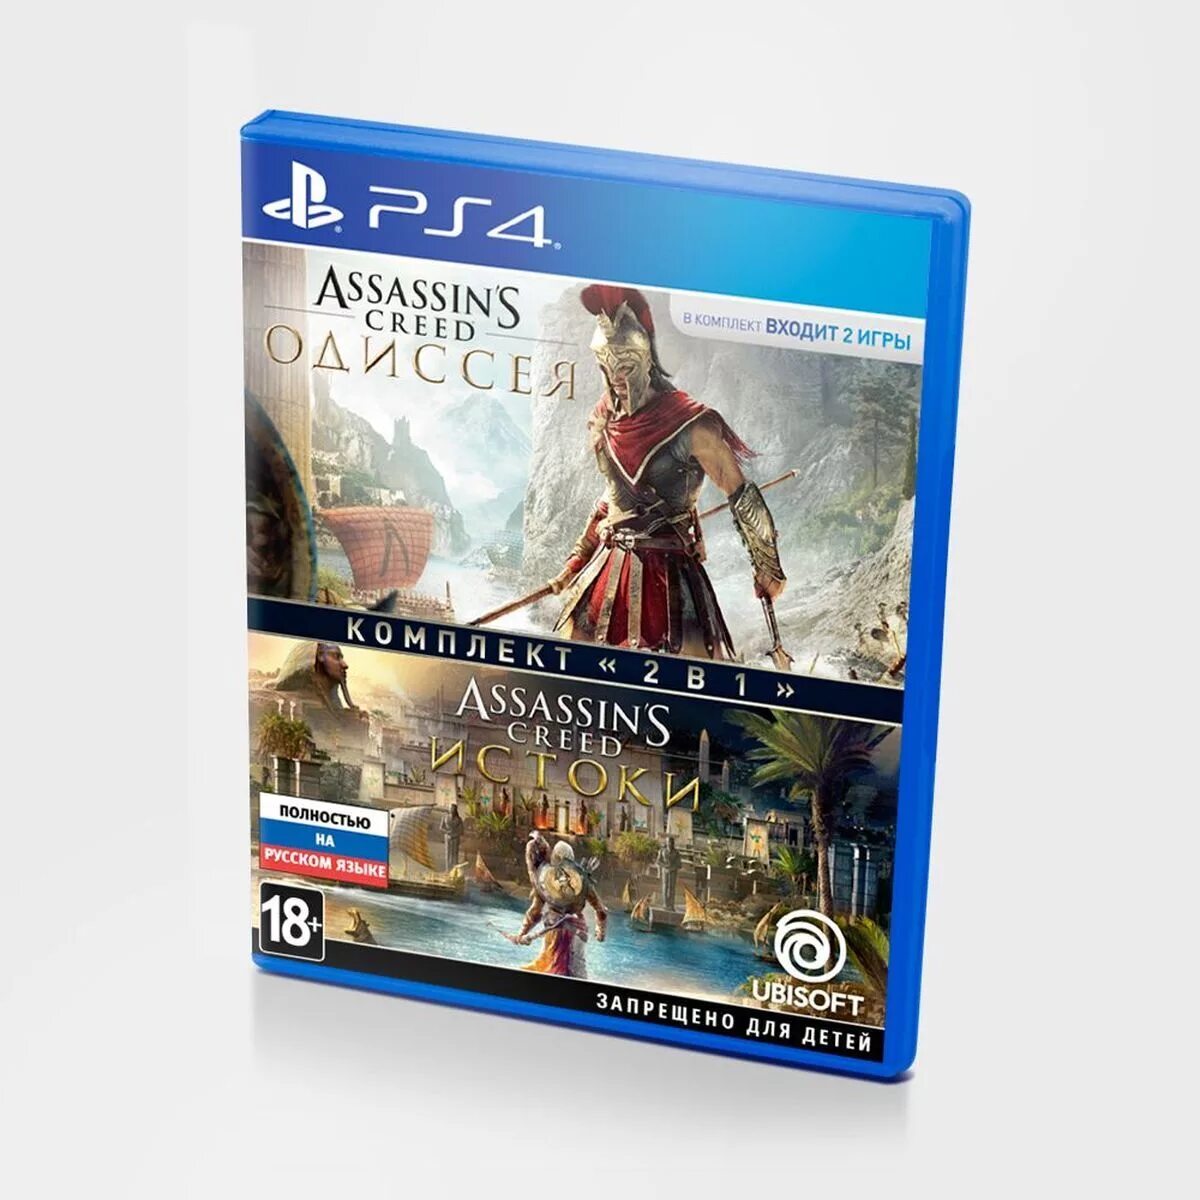 Ps4 диск Assassins Creed. Assassin's Creed Odyssey ps4 диск. Ассасин Истоки диск ps4. Ассасин Истоки Одиссея 2в1 диск. Игра assassins creed ps4